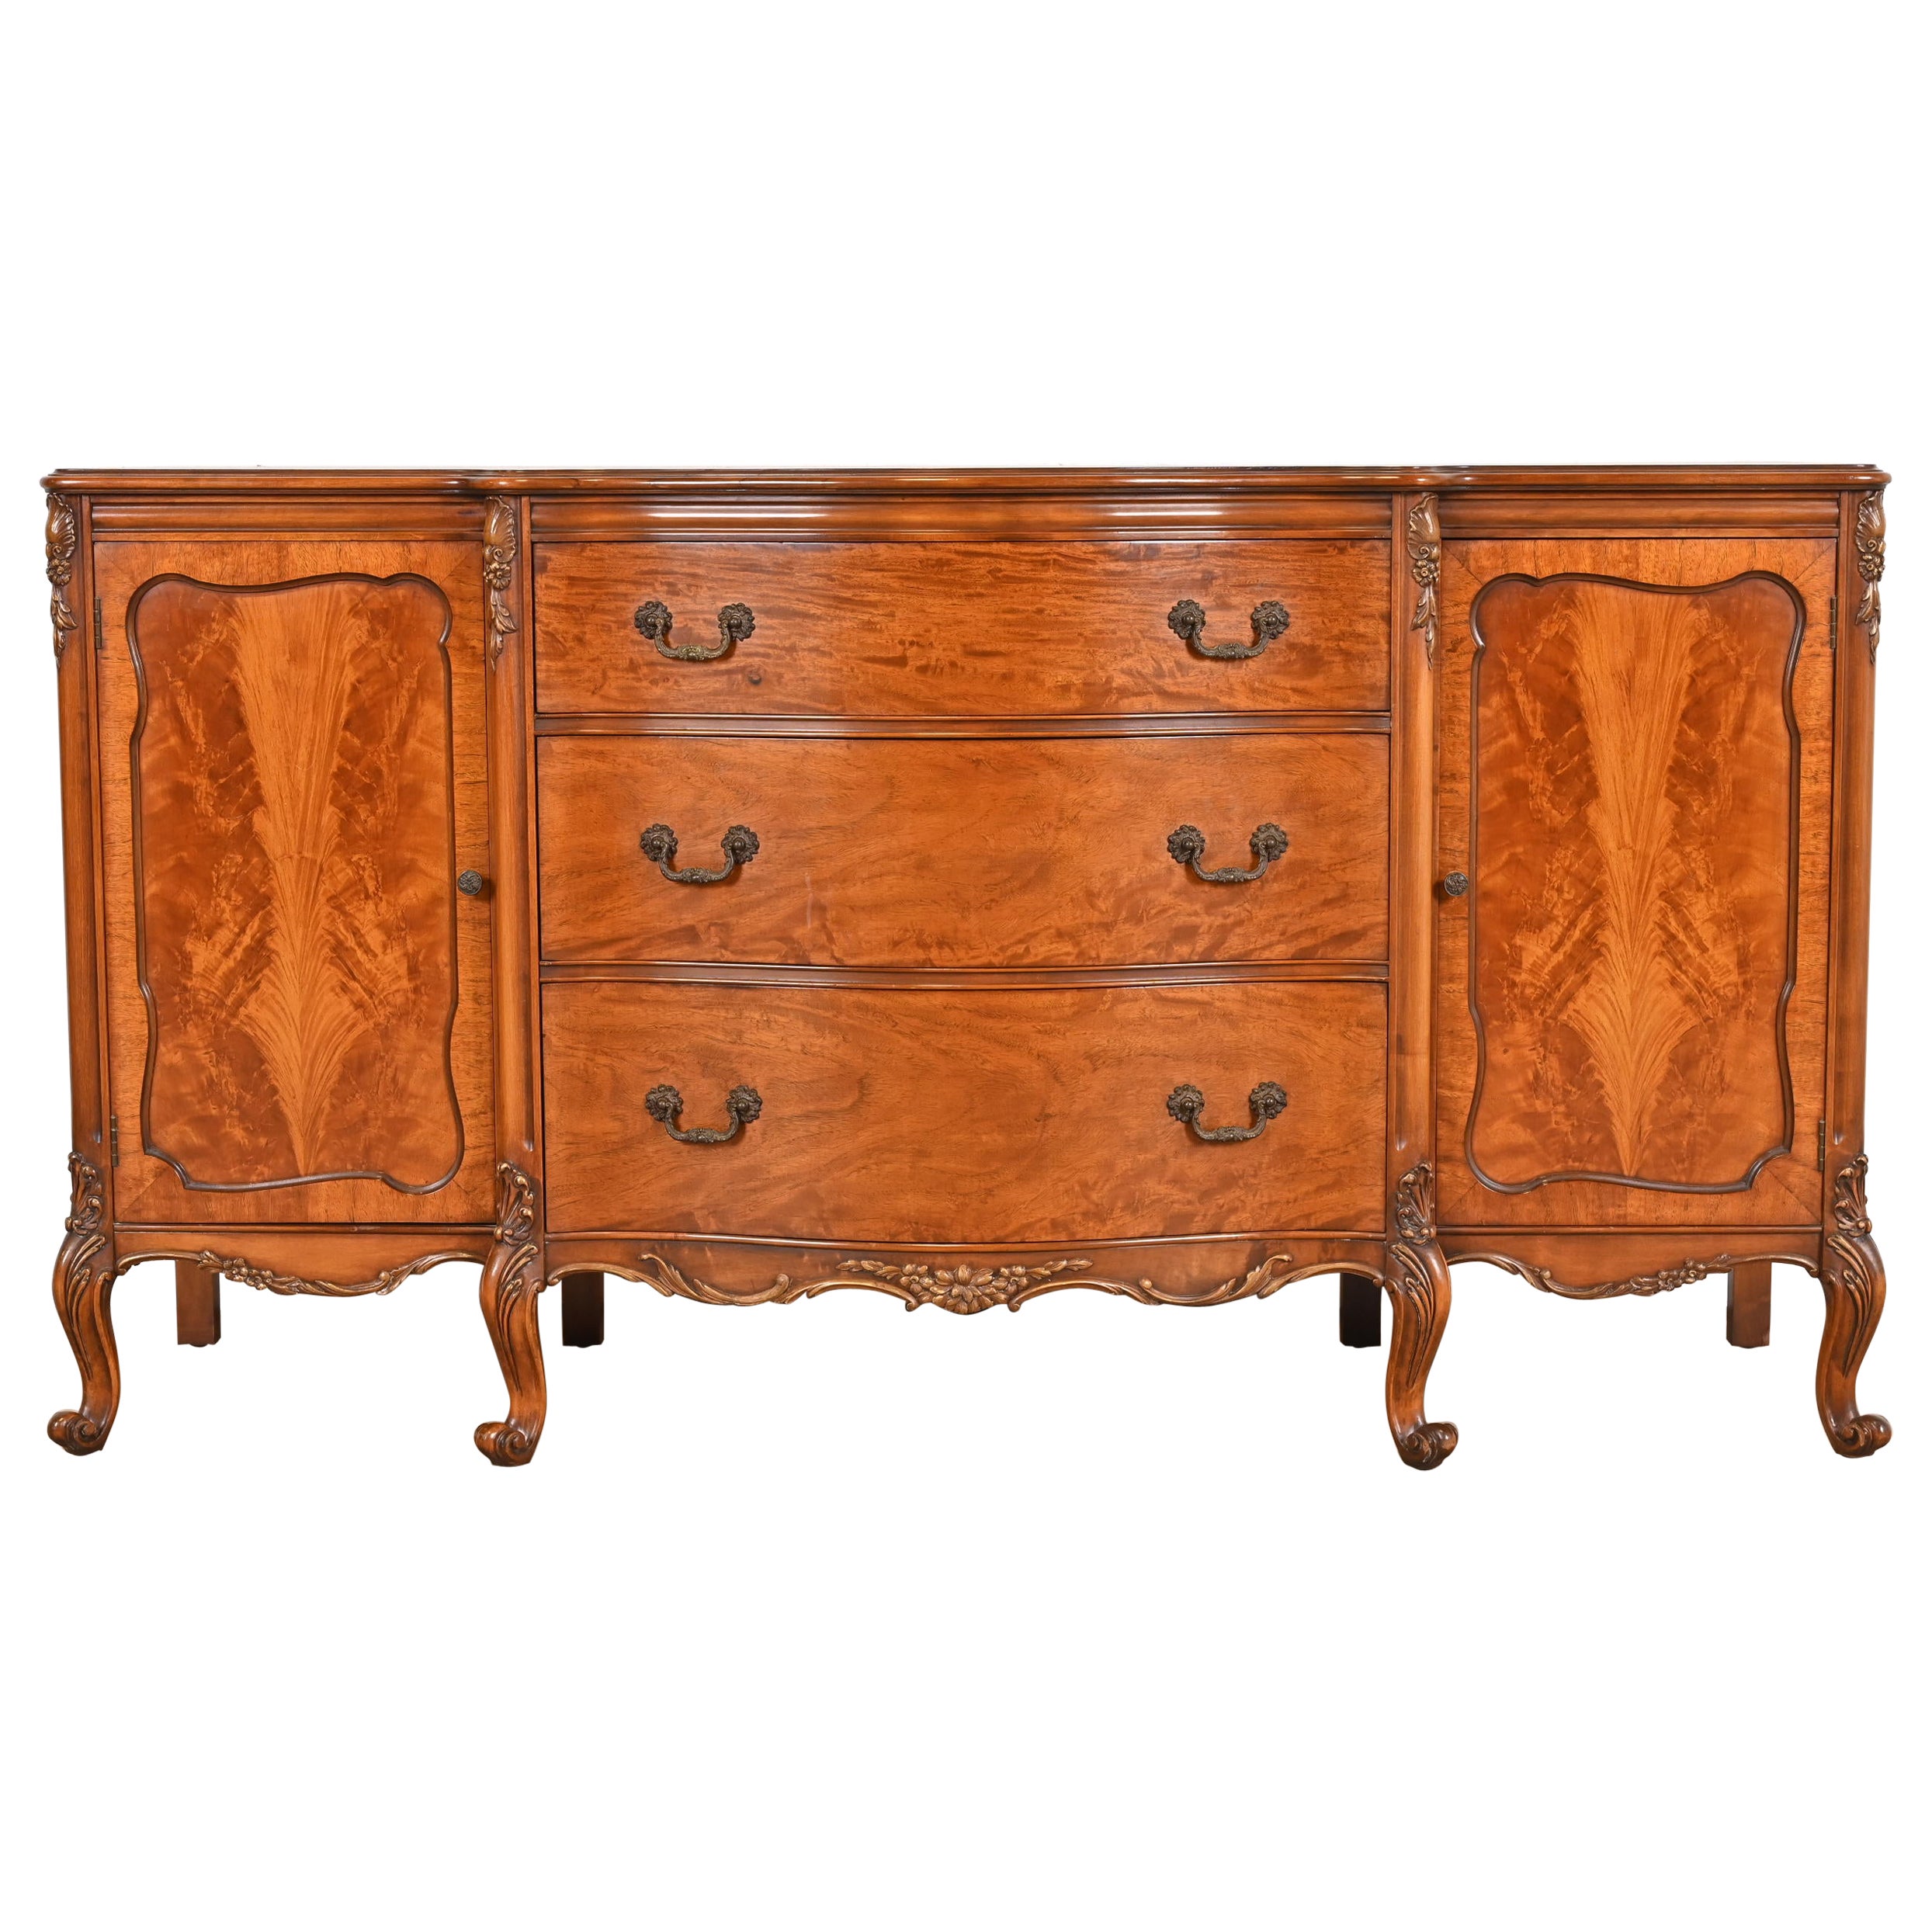 Romweber French Provincial Louis XV Burl Wood Sideboard Credenza, Circa 1920s